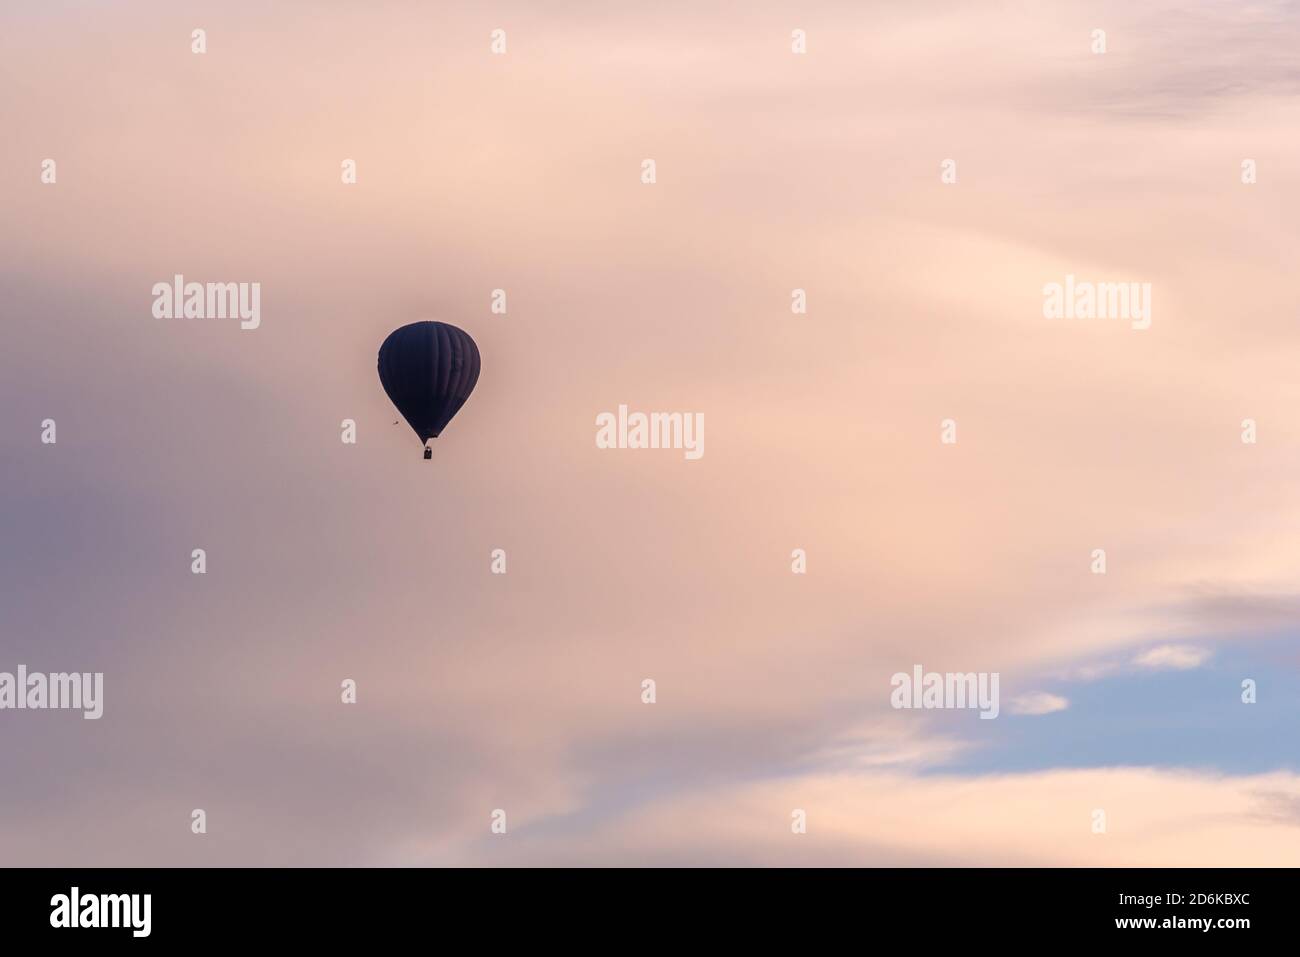 Aerostatic balloon flying over a colorful sky at dawn Stock Photo